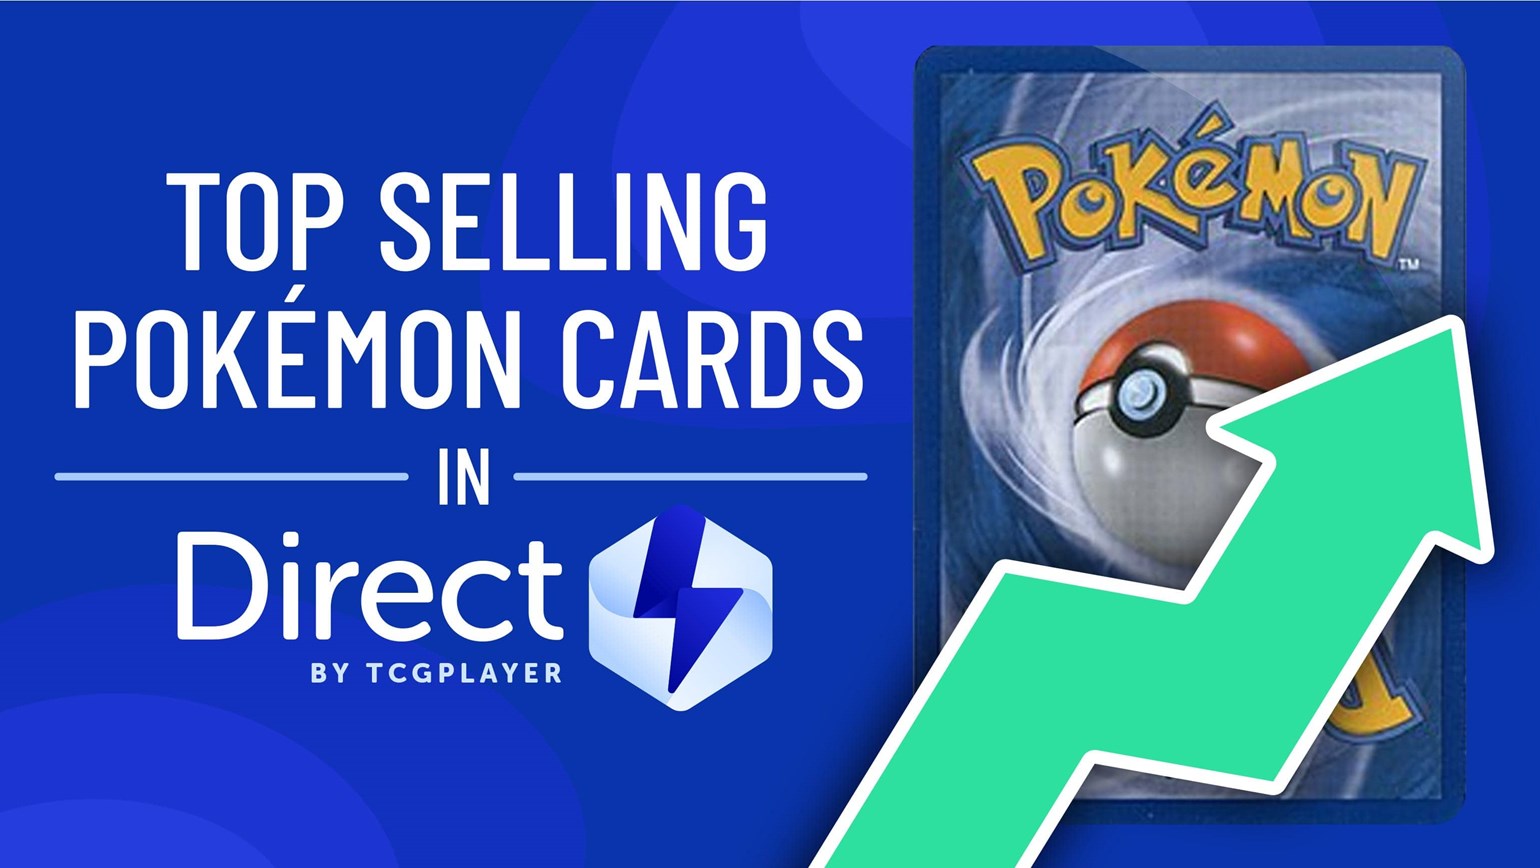 March Top Selling Pokémon Cards in Direct by TCGplayer